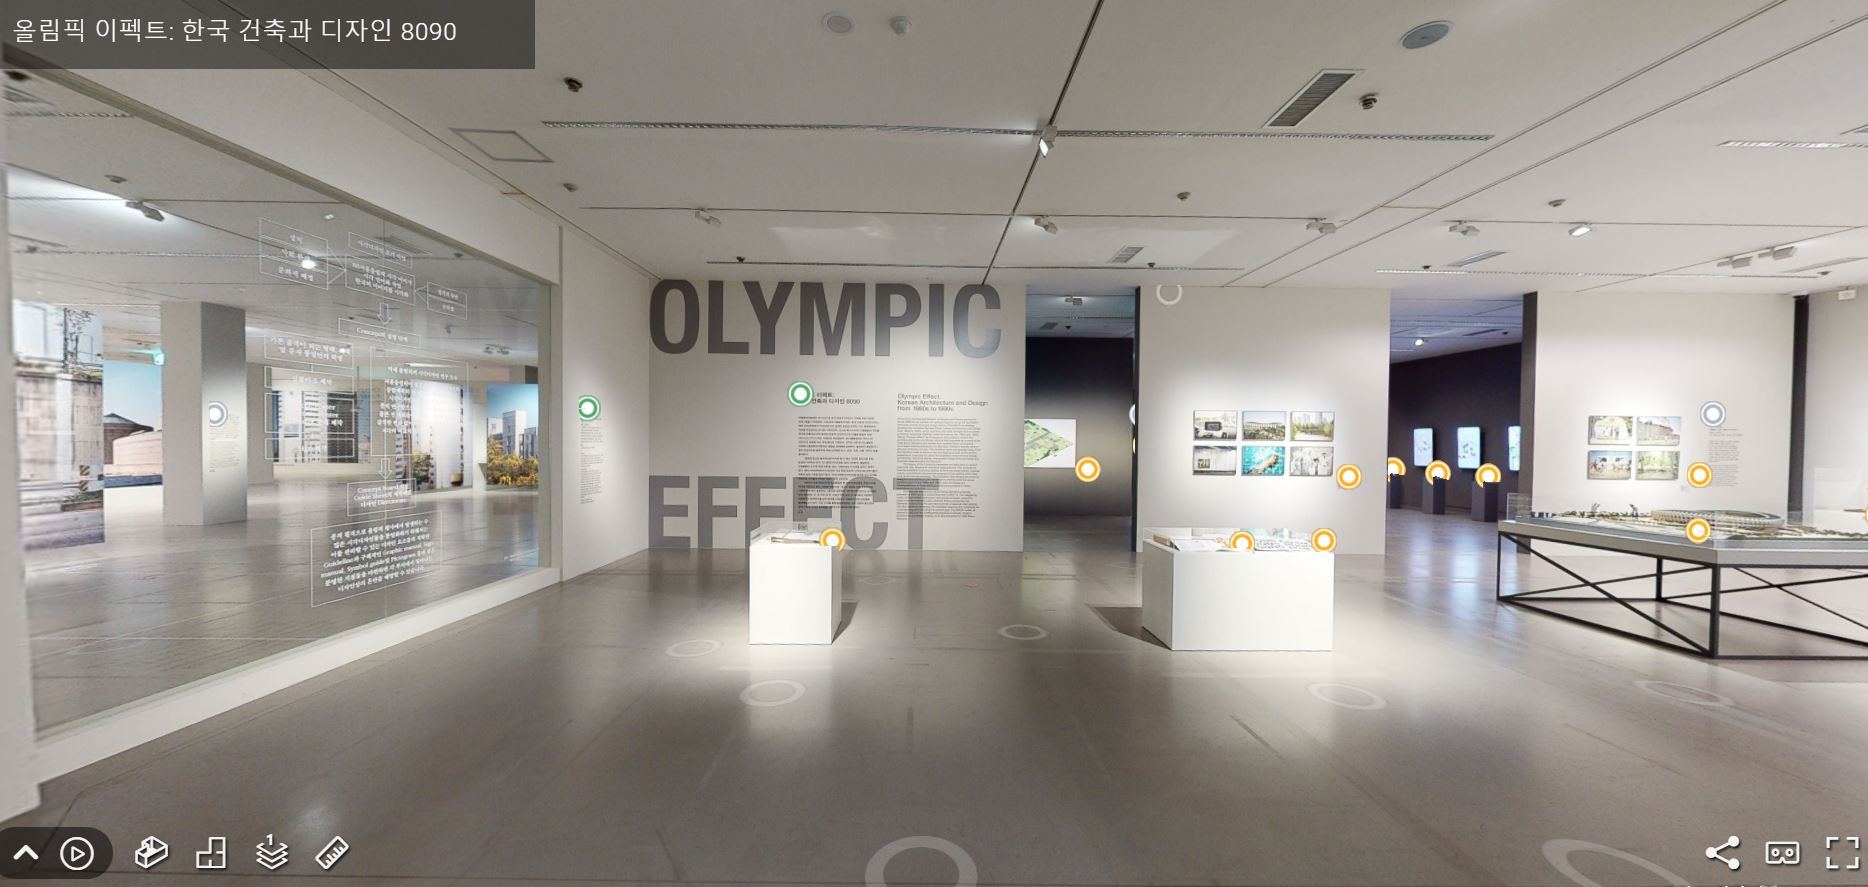 VR Tour for Olympic Effect: Korean Architecture and Design from 1980s to 1990s 이미지